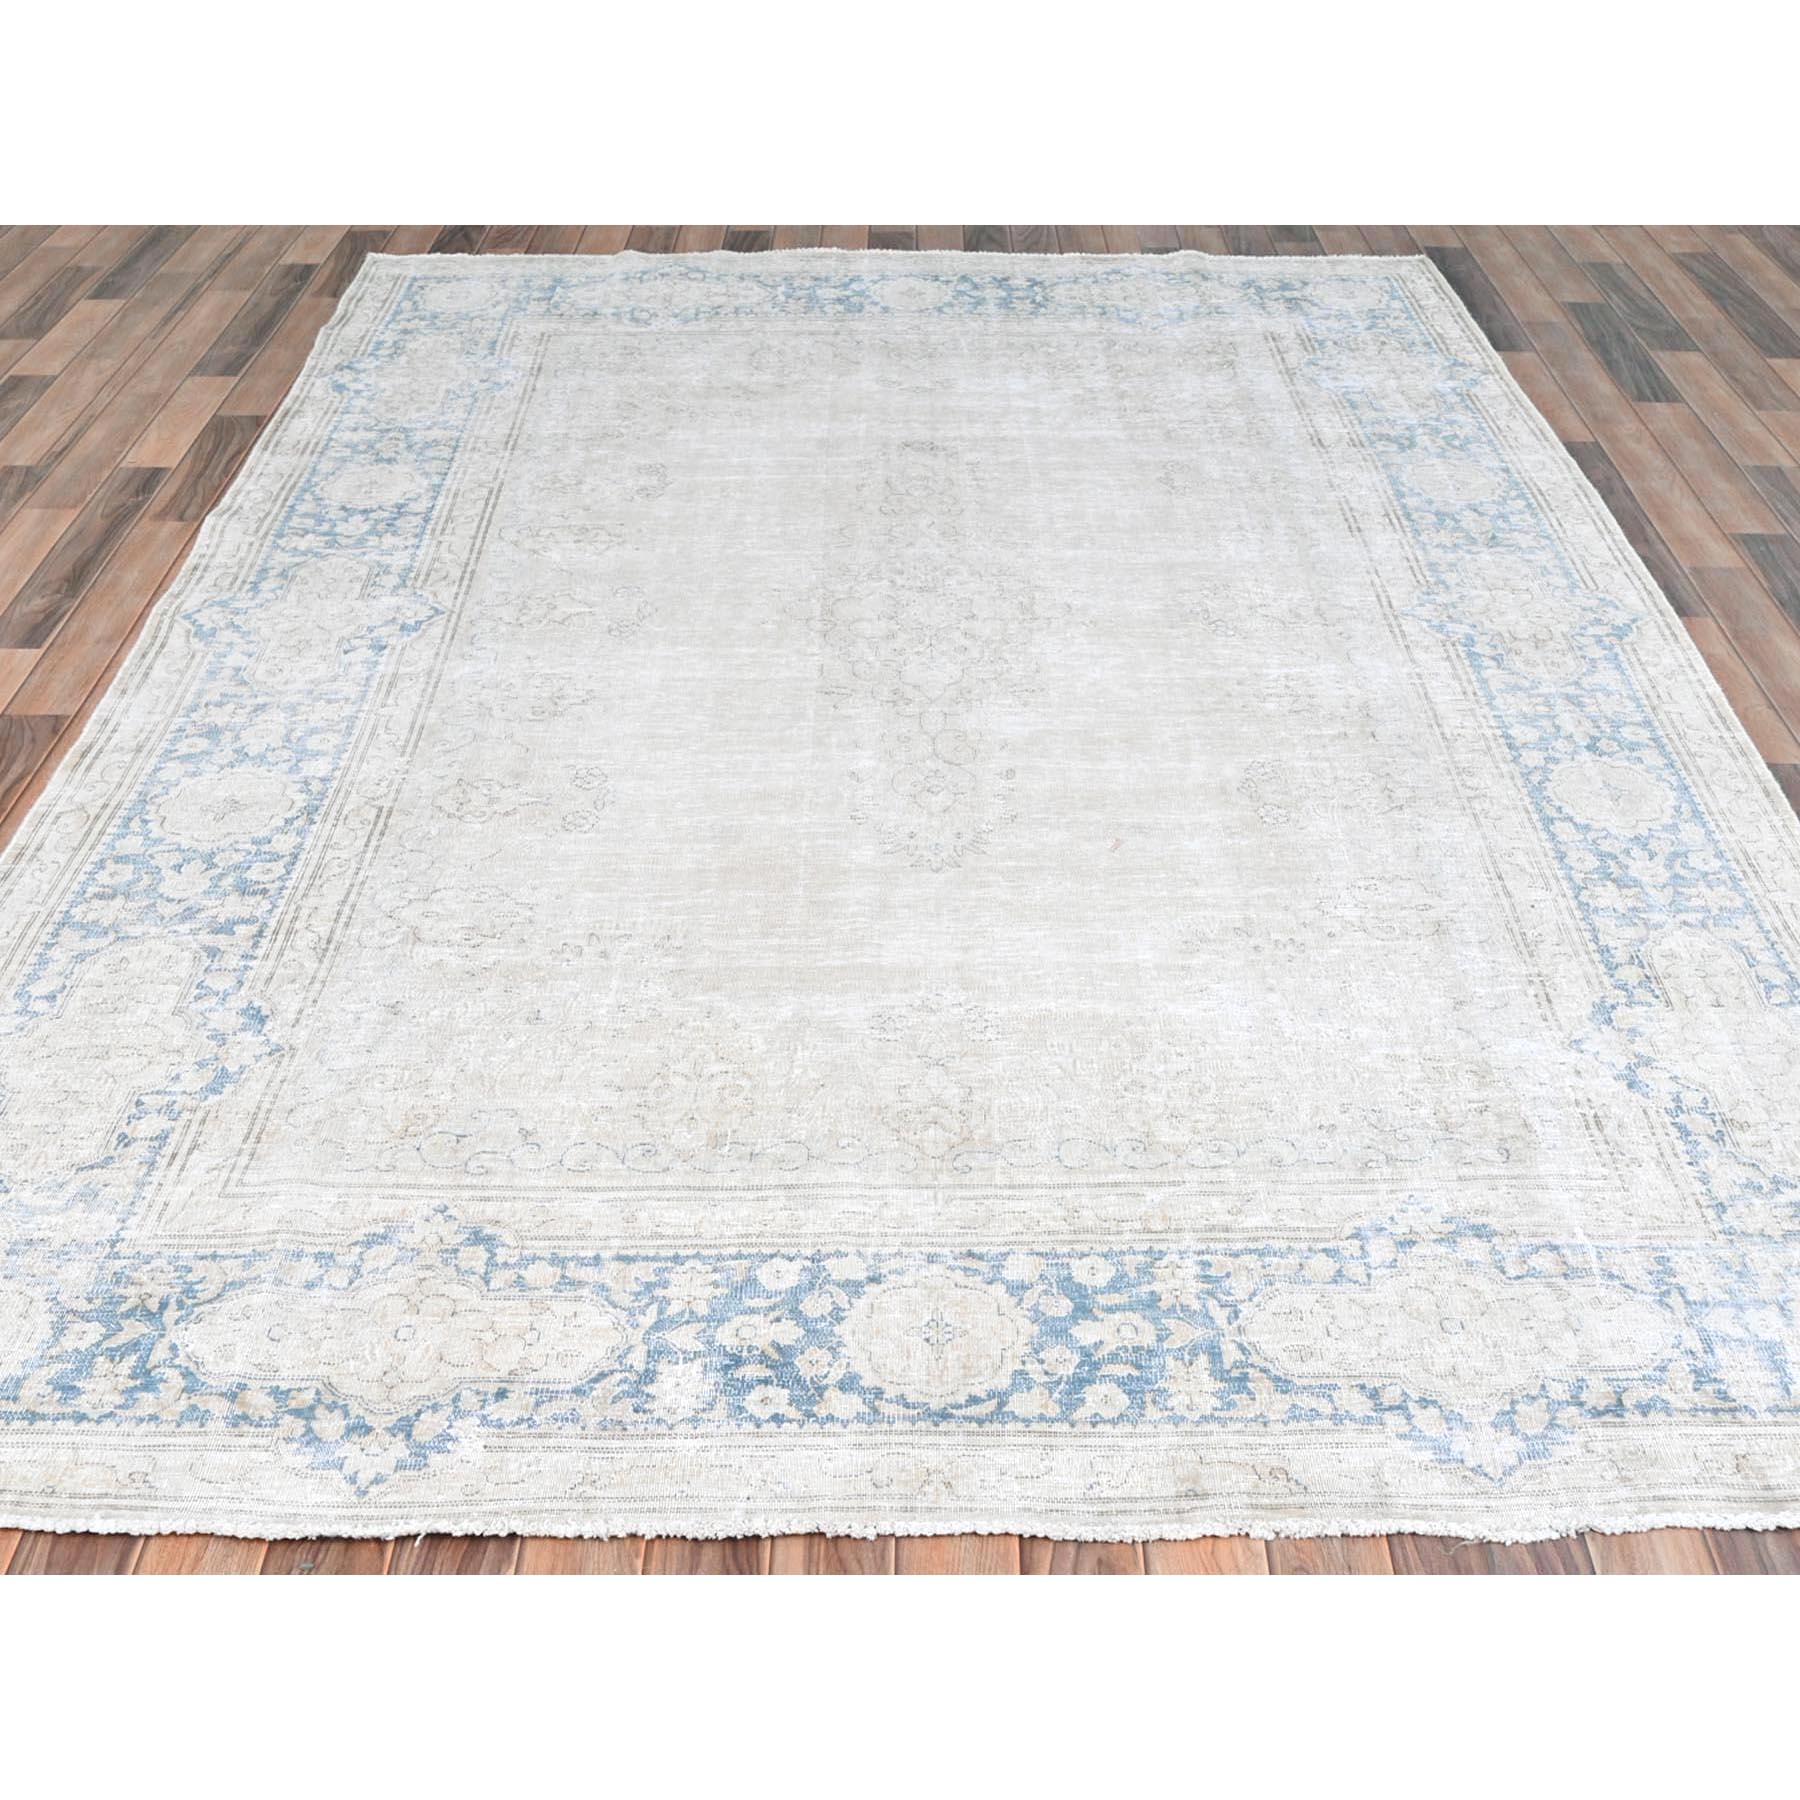 Medieval Ivory Hand Knotted Vintage Persian Kerman Sheared Low Distressed Worn Wool Rug For Sale